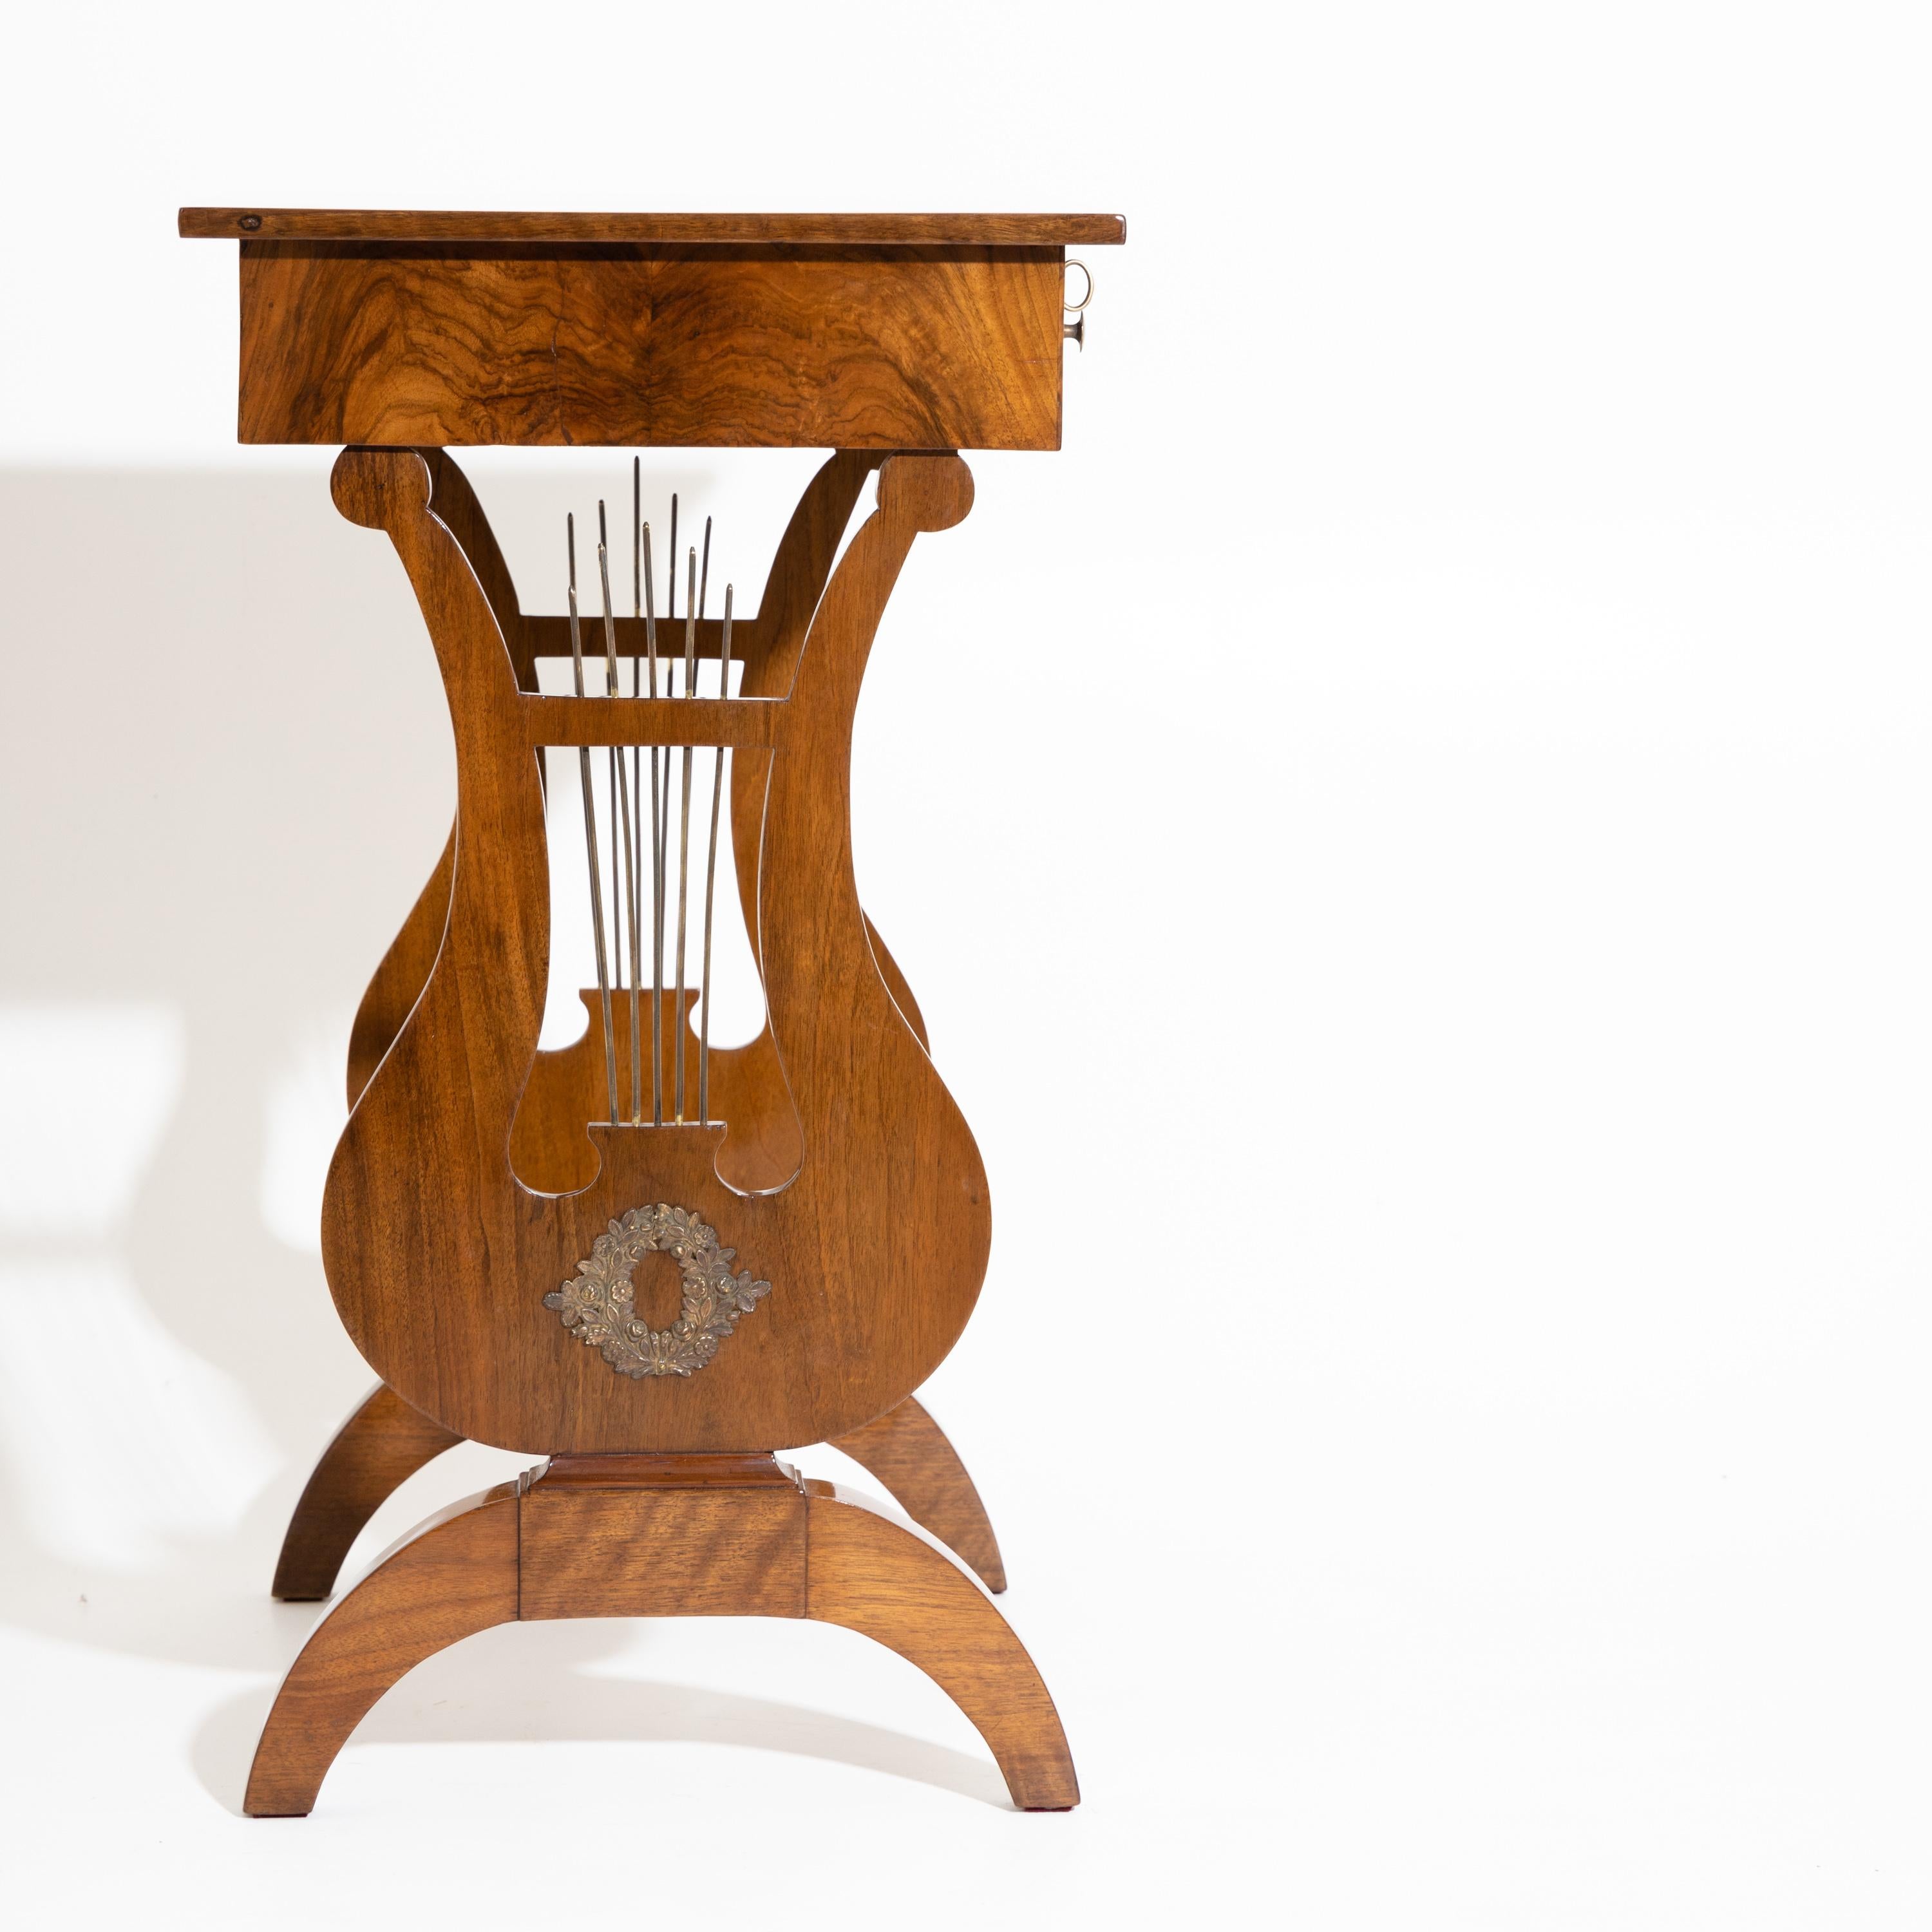 Biedermeier side table on lyre legs with brass strings and decorations as well as one drawer with round brass knobs and practical interior division. The table is veneered in walnut and expertly hand polished.